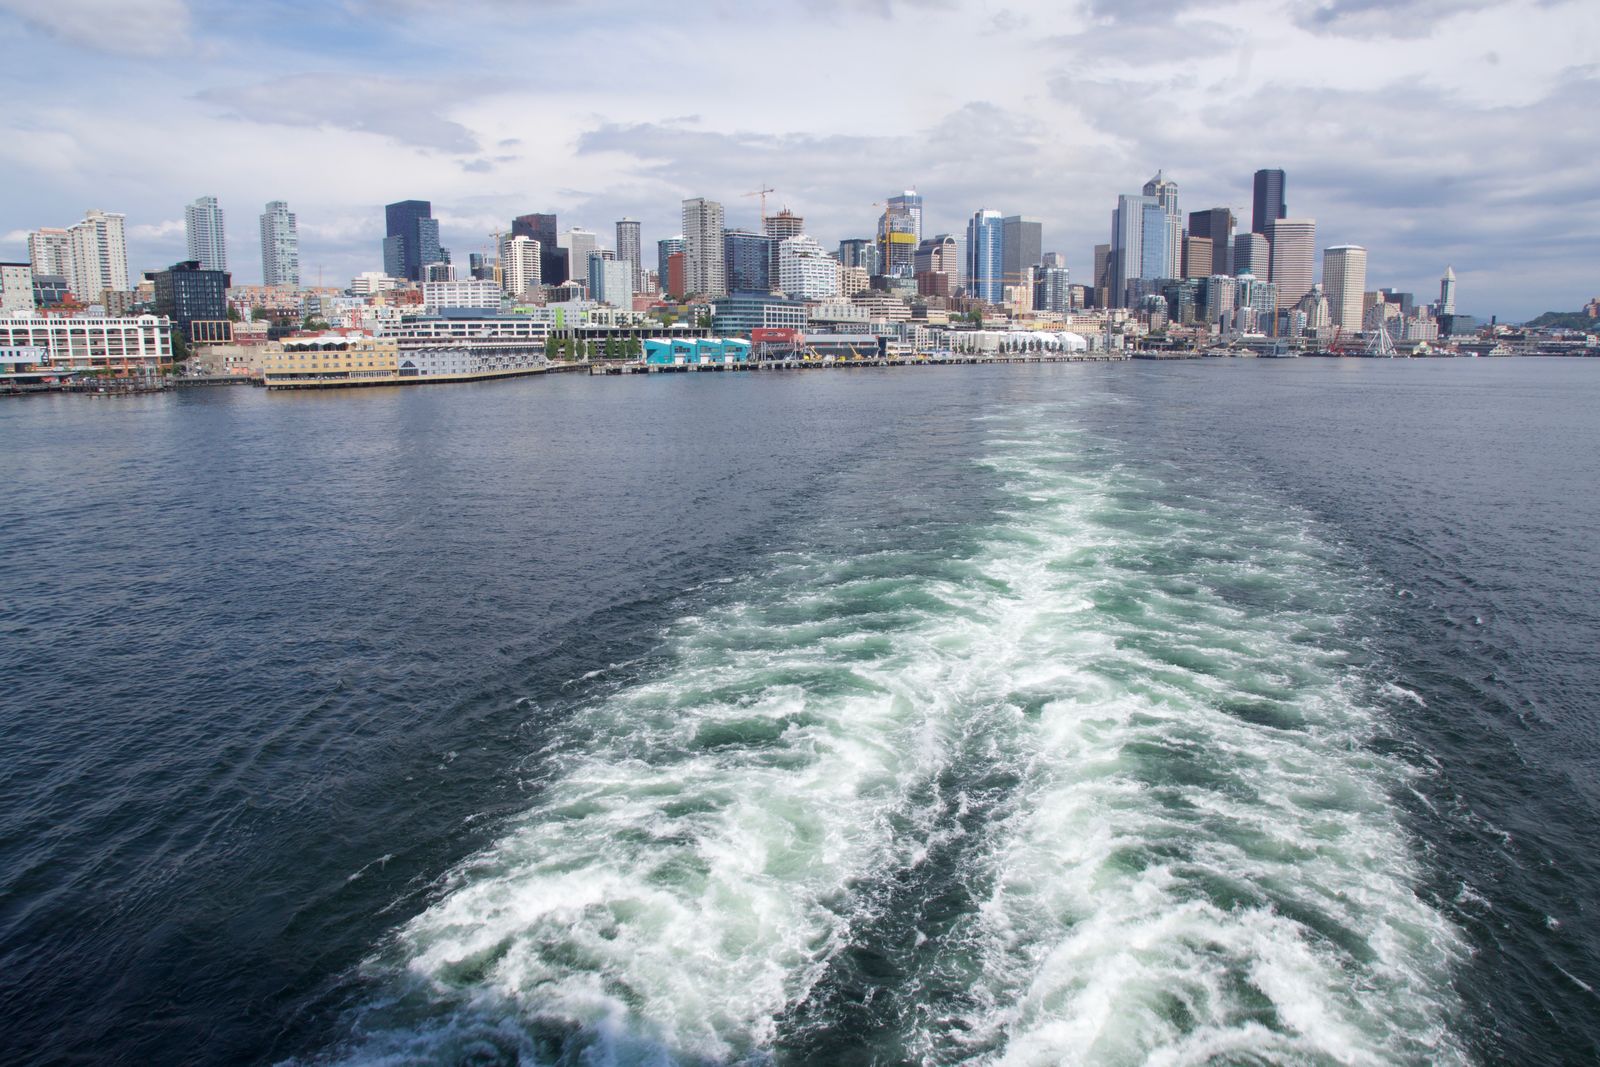 Leaving Seattle on a cruise ship